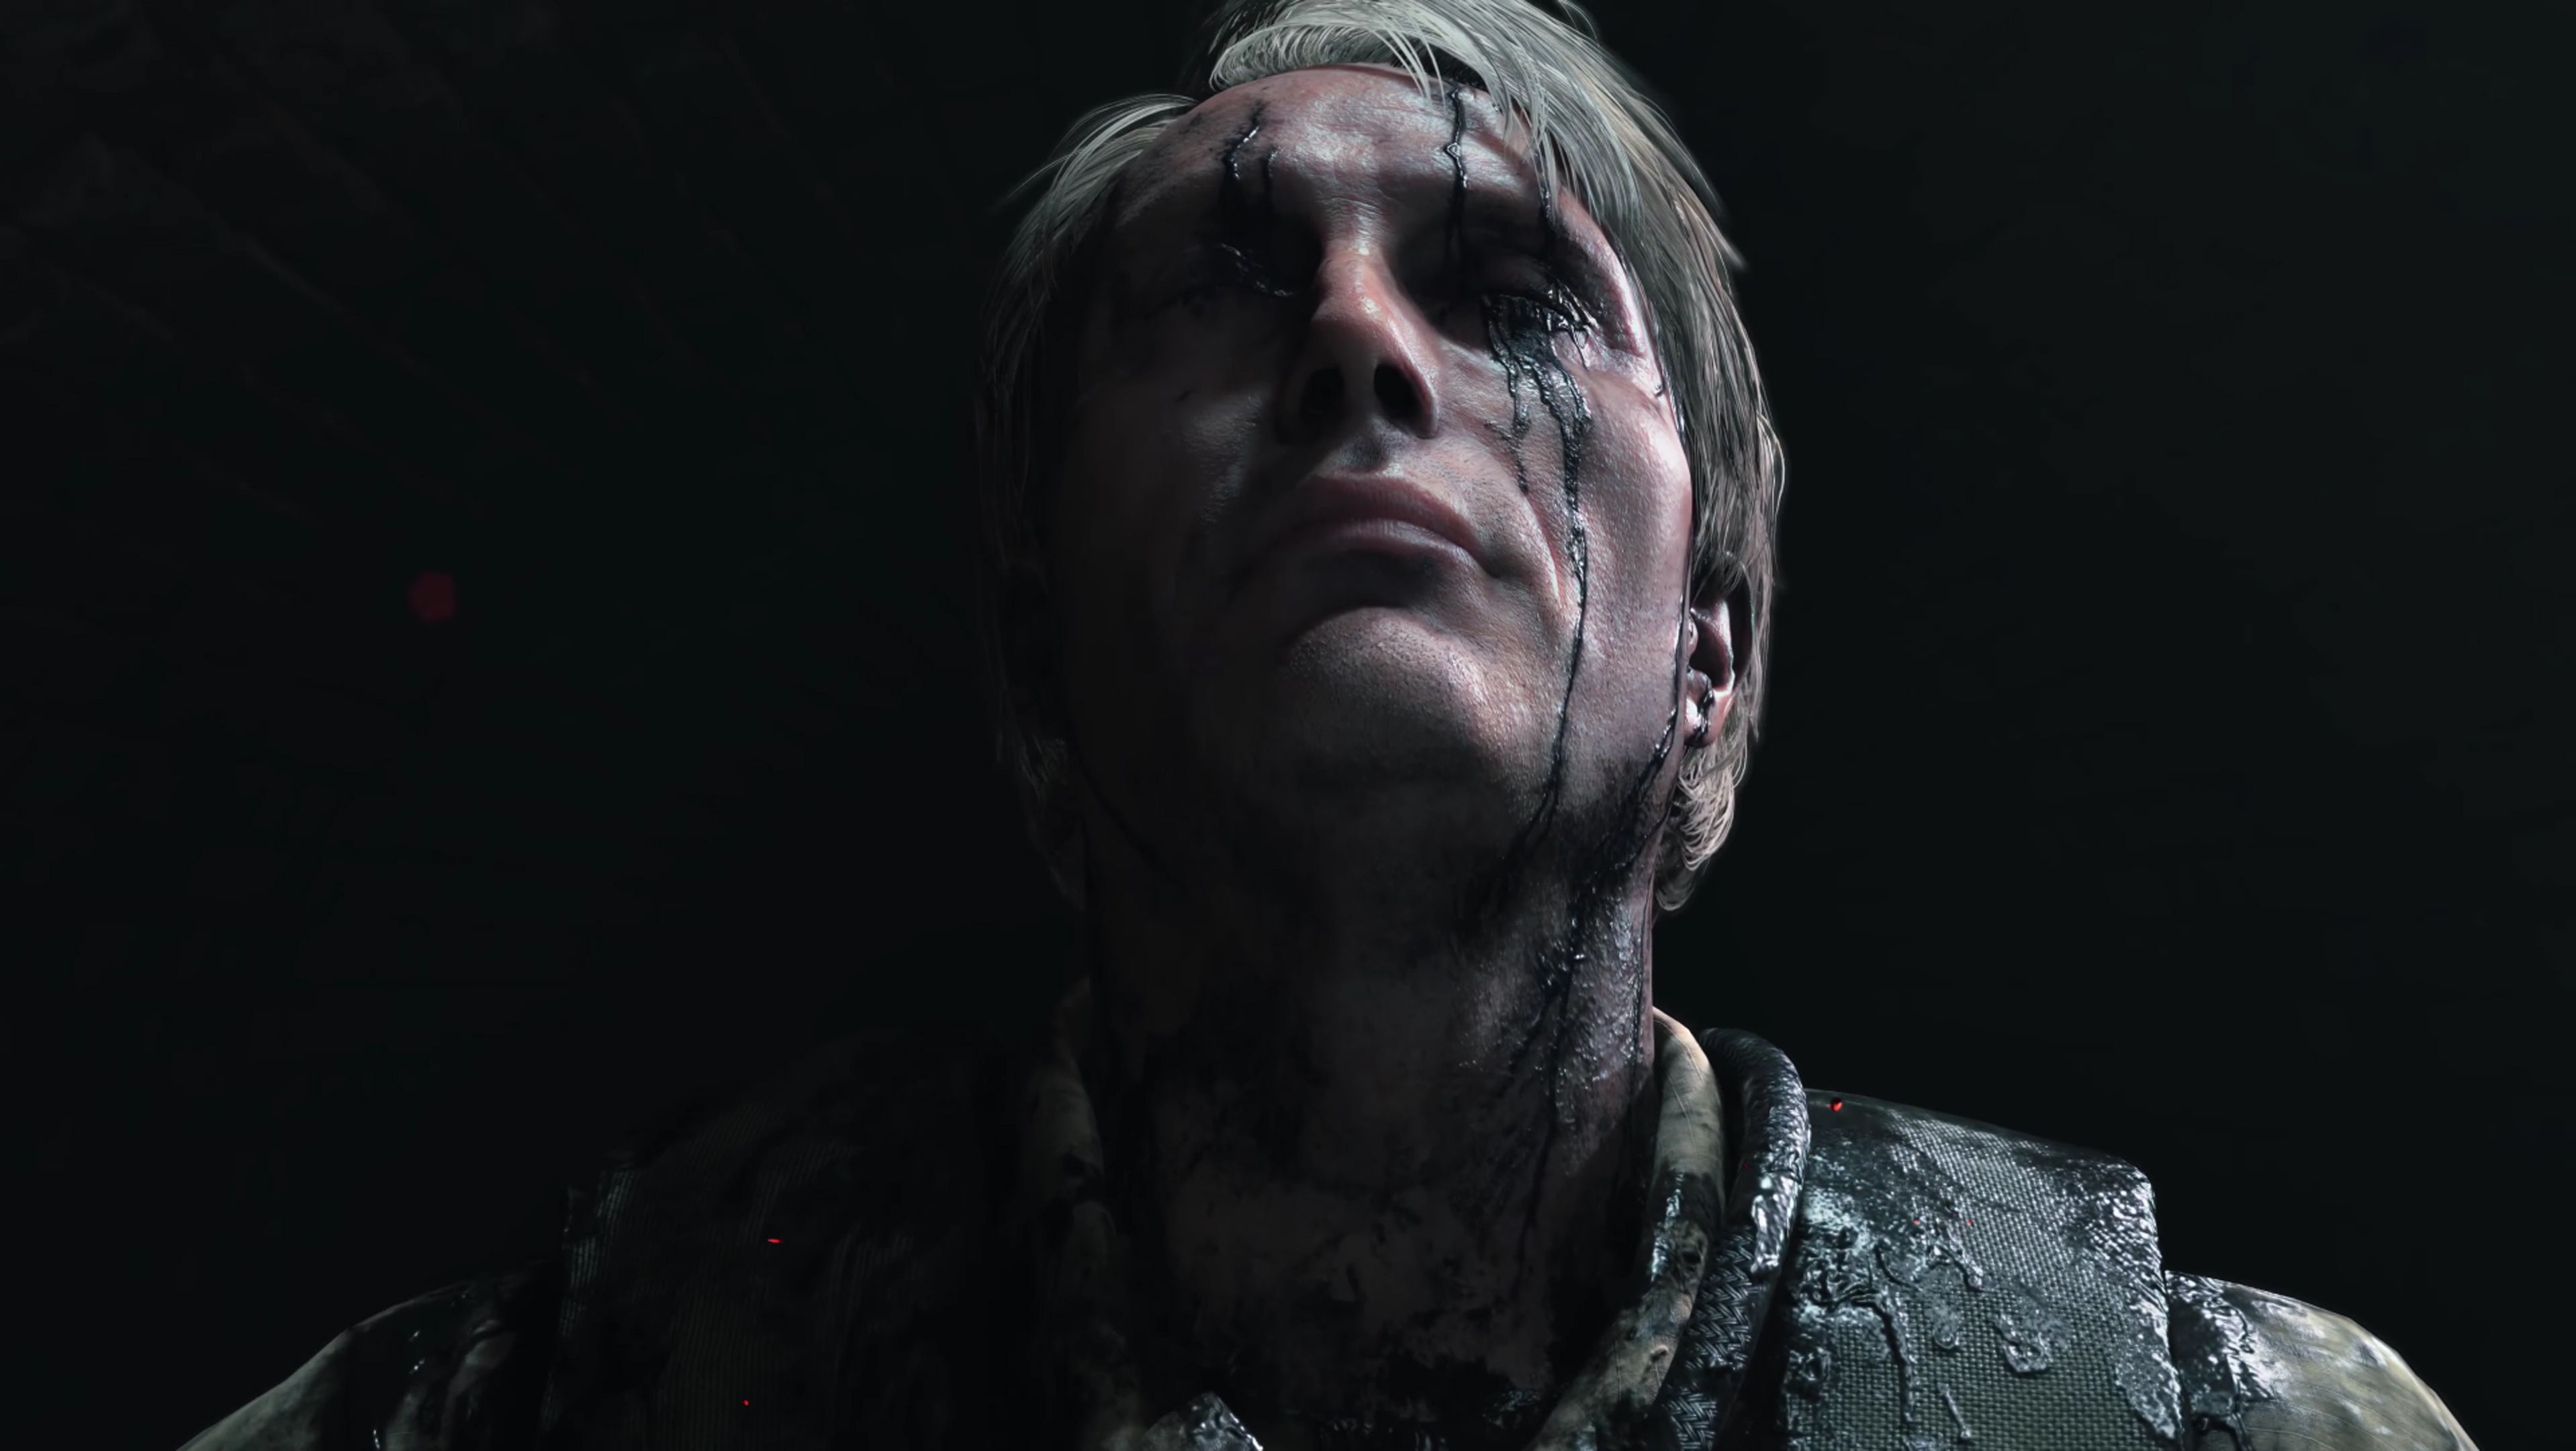 Mads Mikkelsen says comparing Death Stranding to Brexit is 'boring'